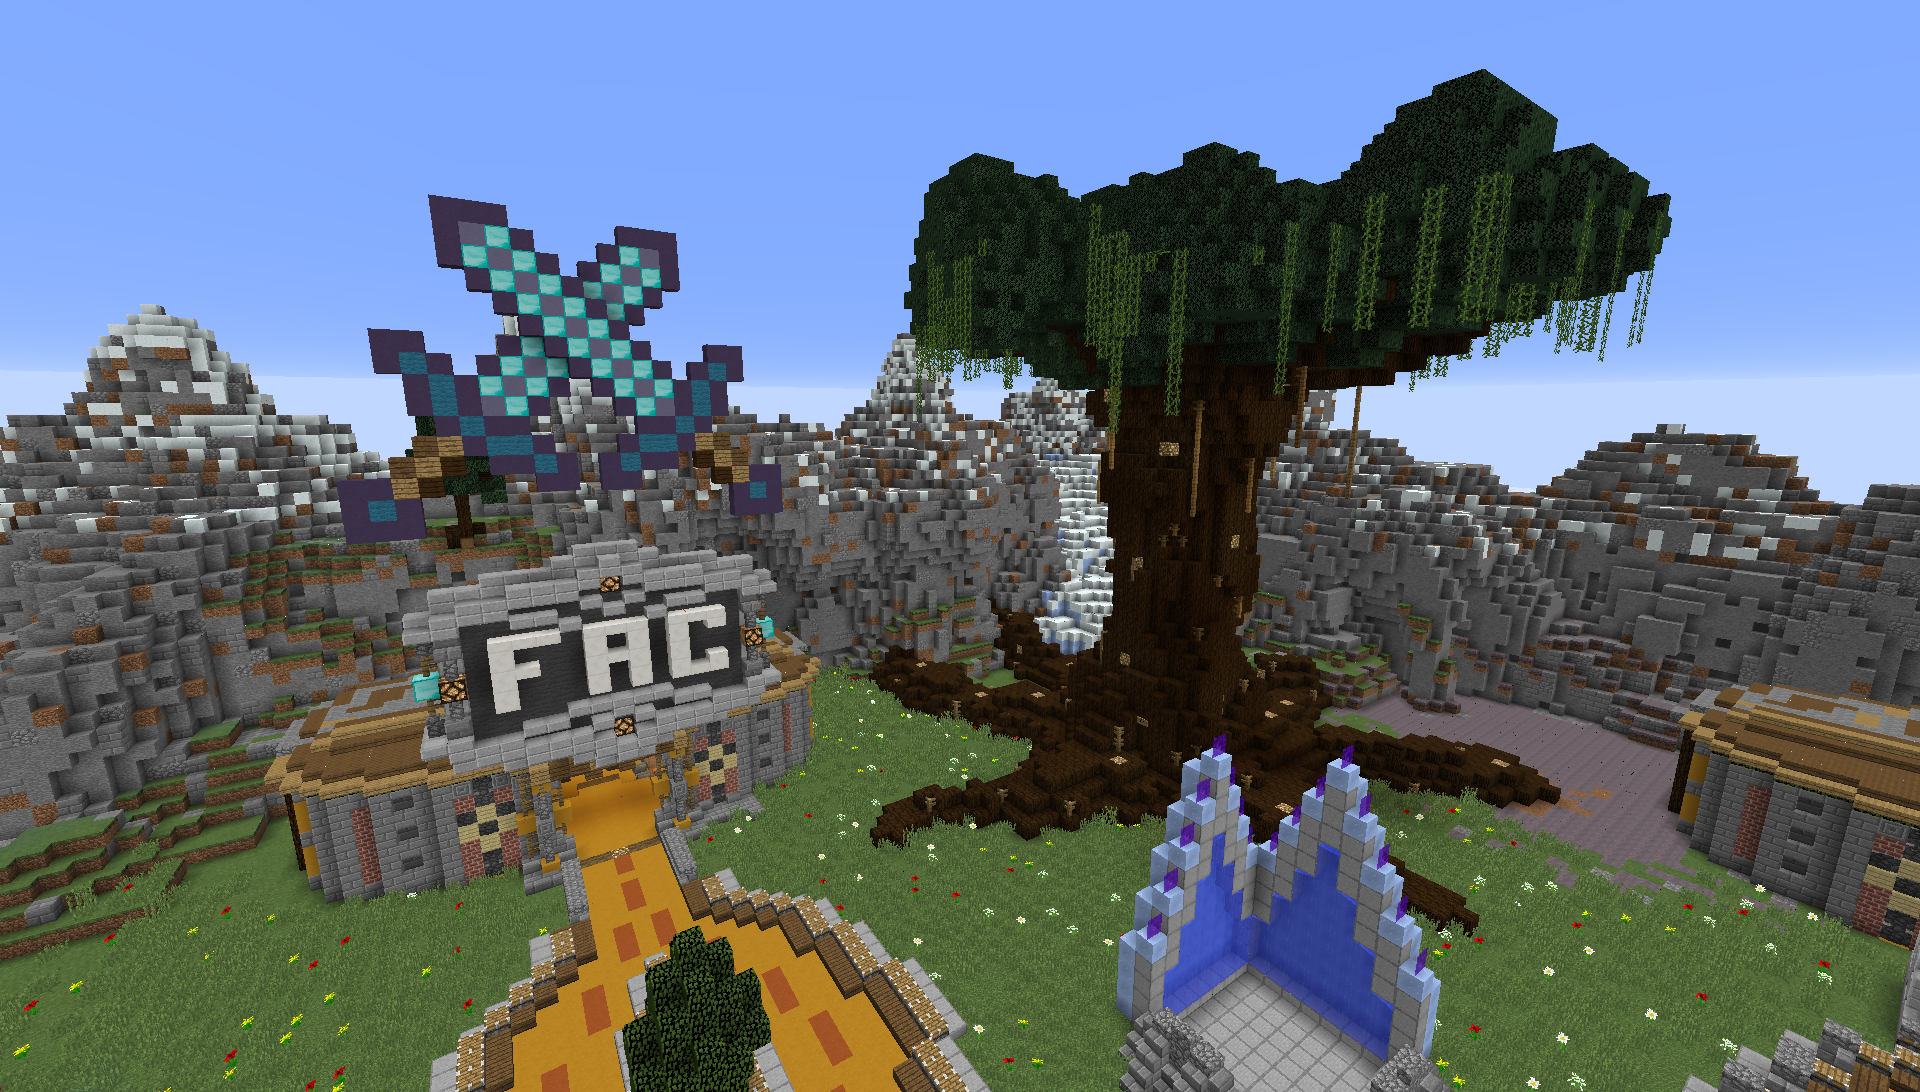 This shows a great Minecraft factions server